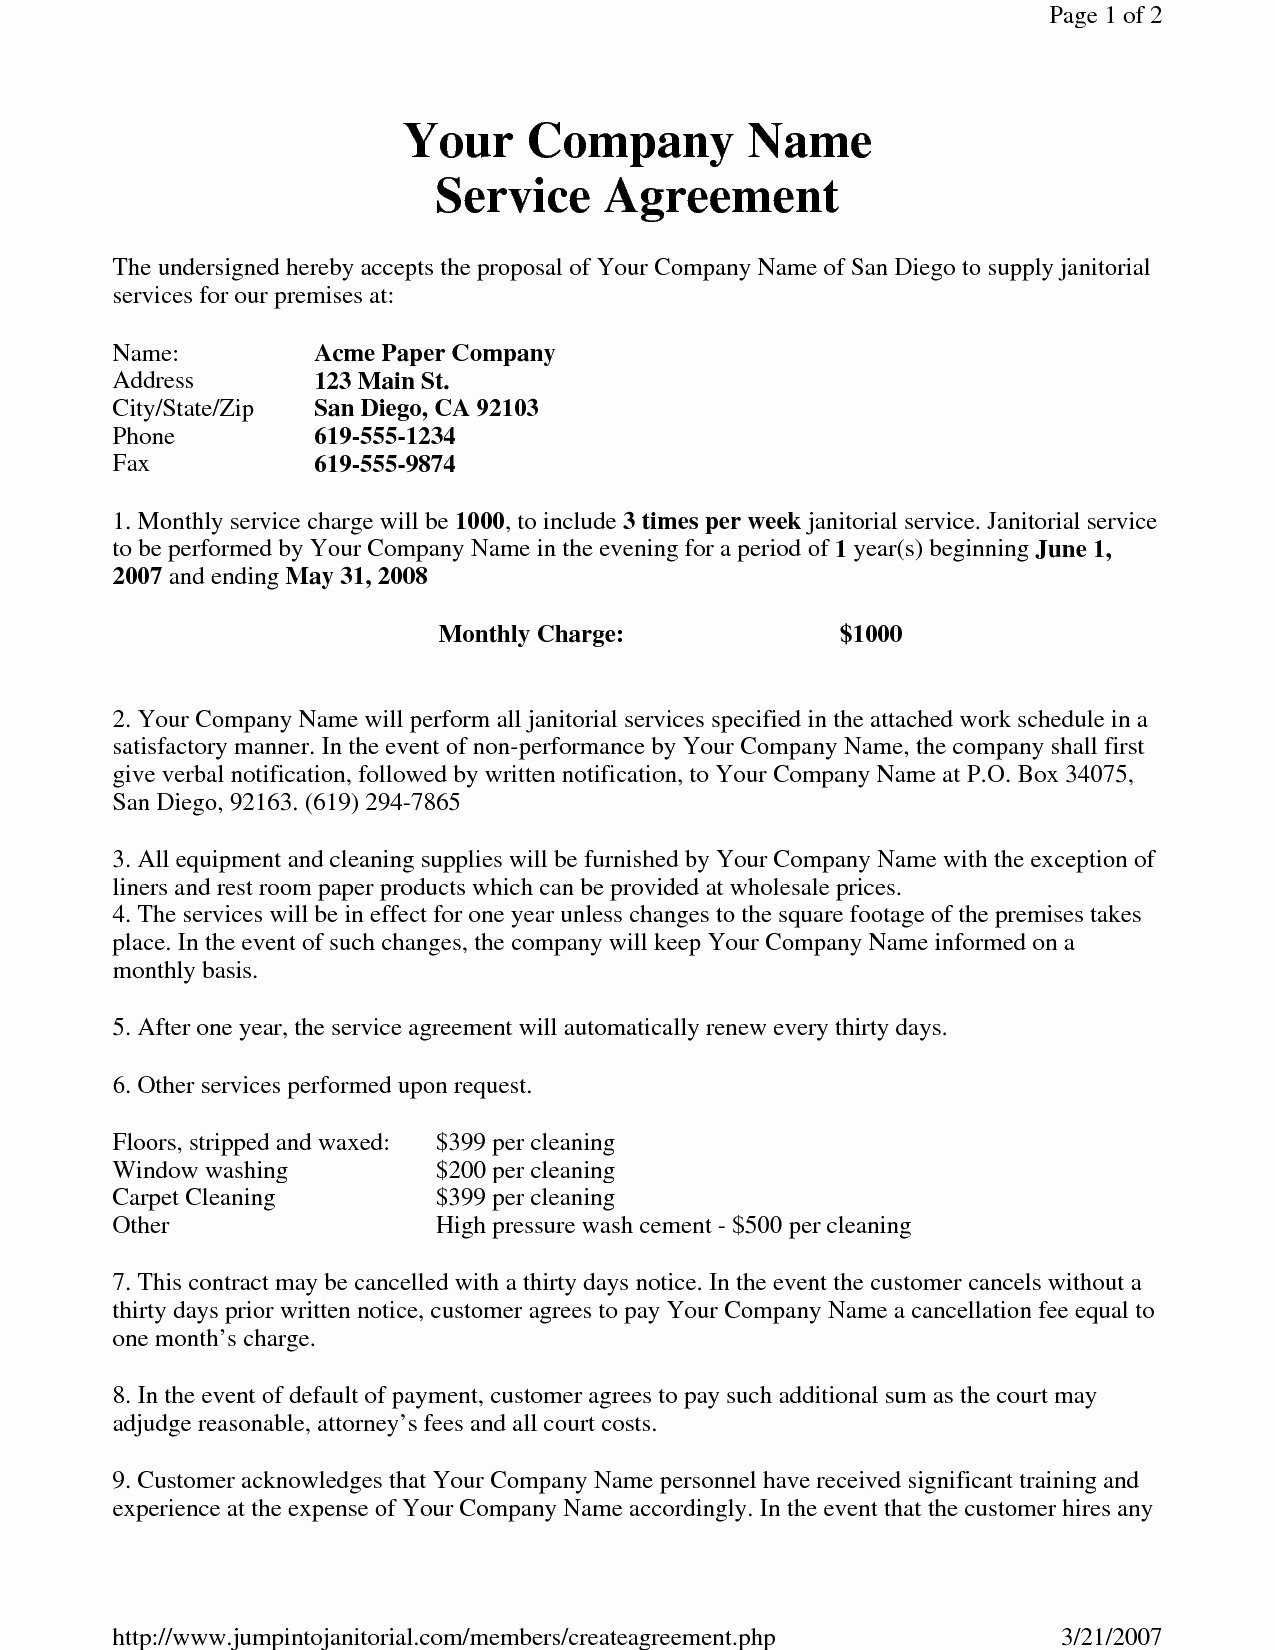 Service Contract Template Pdf Luxury Virtual assistant Contract Fresh Janitorial Service